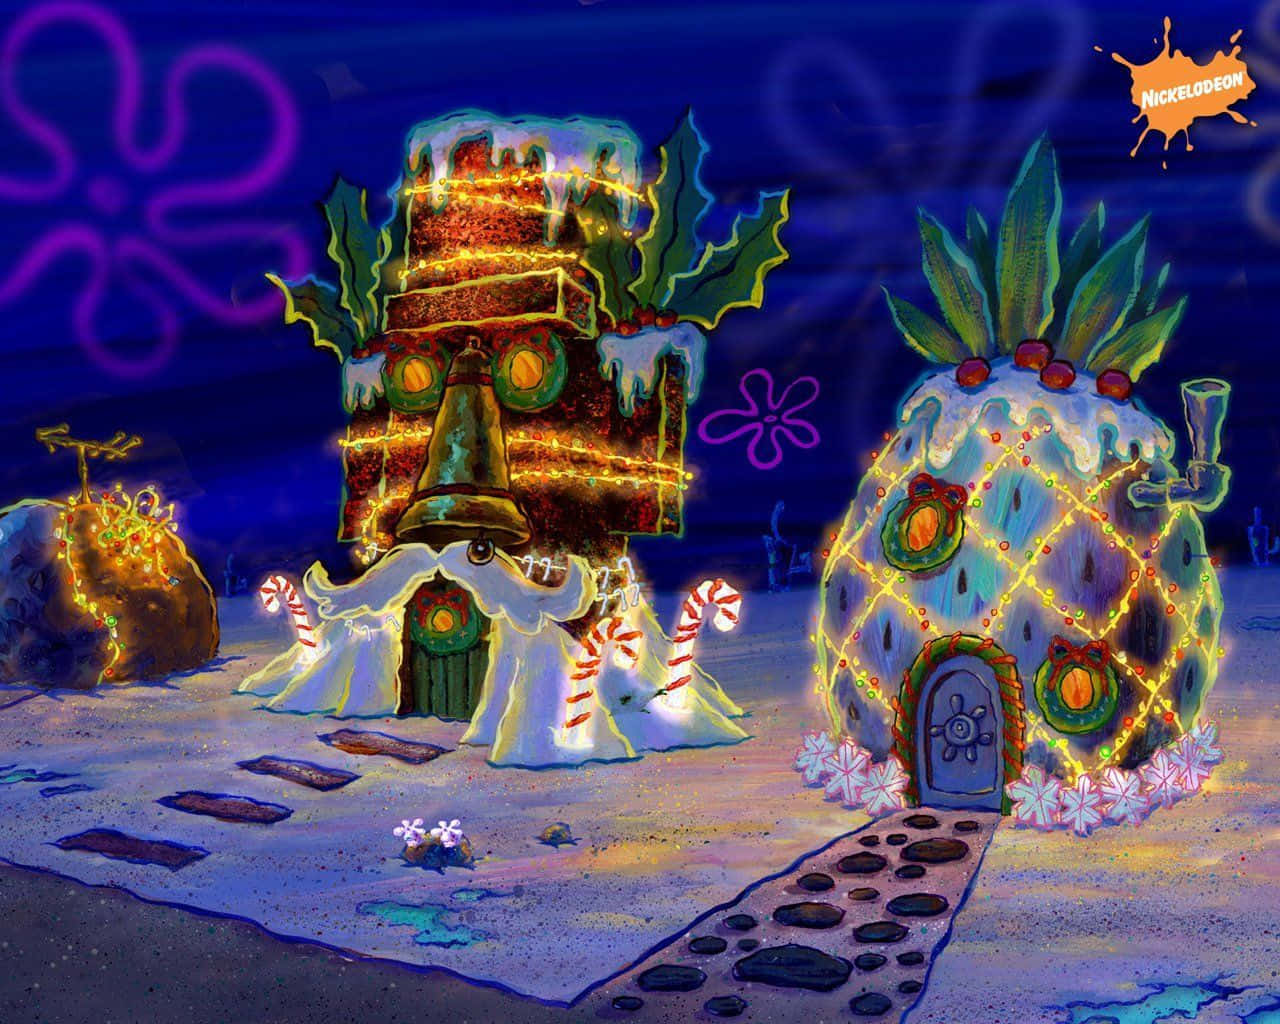 Visit Spongebob House - The Place Where Everyone Wants to Be! Wallpaper